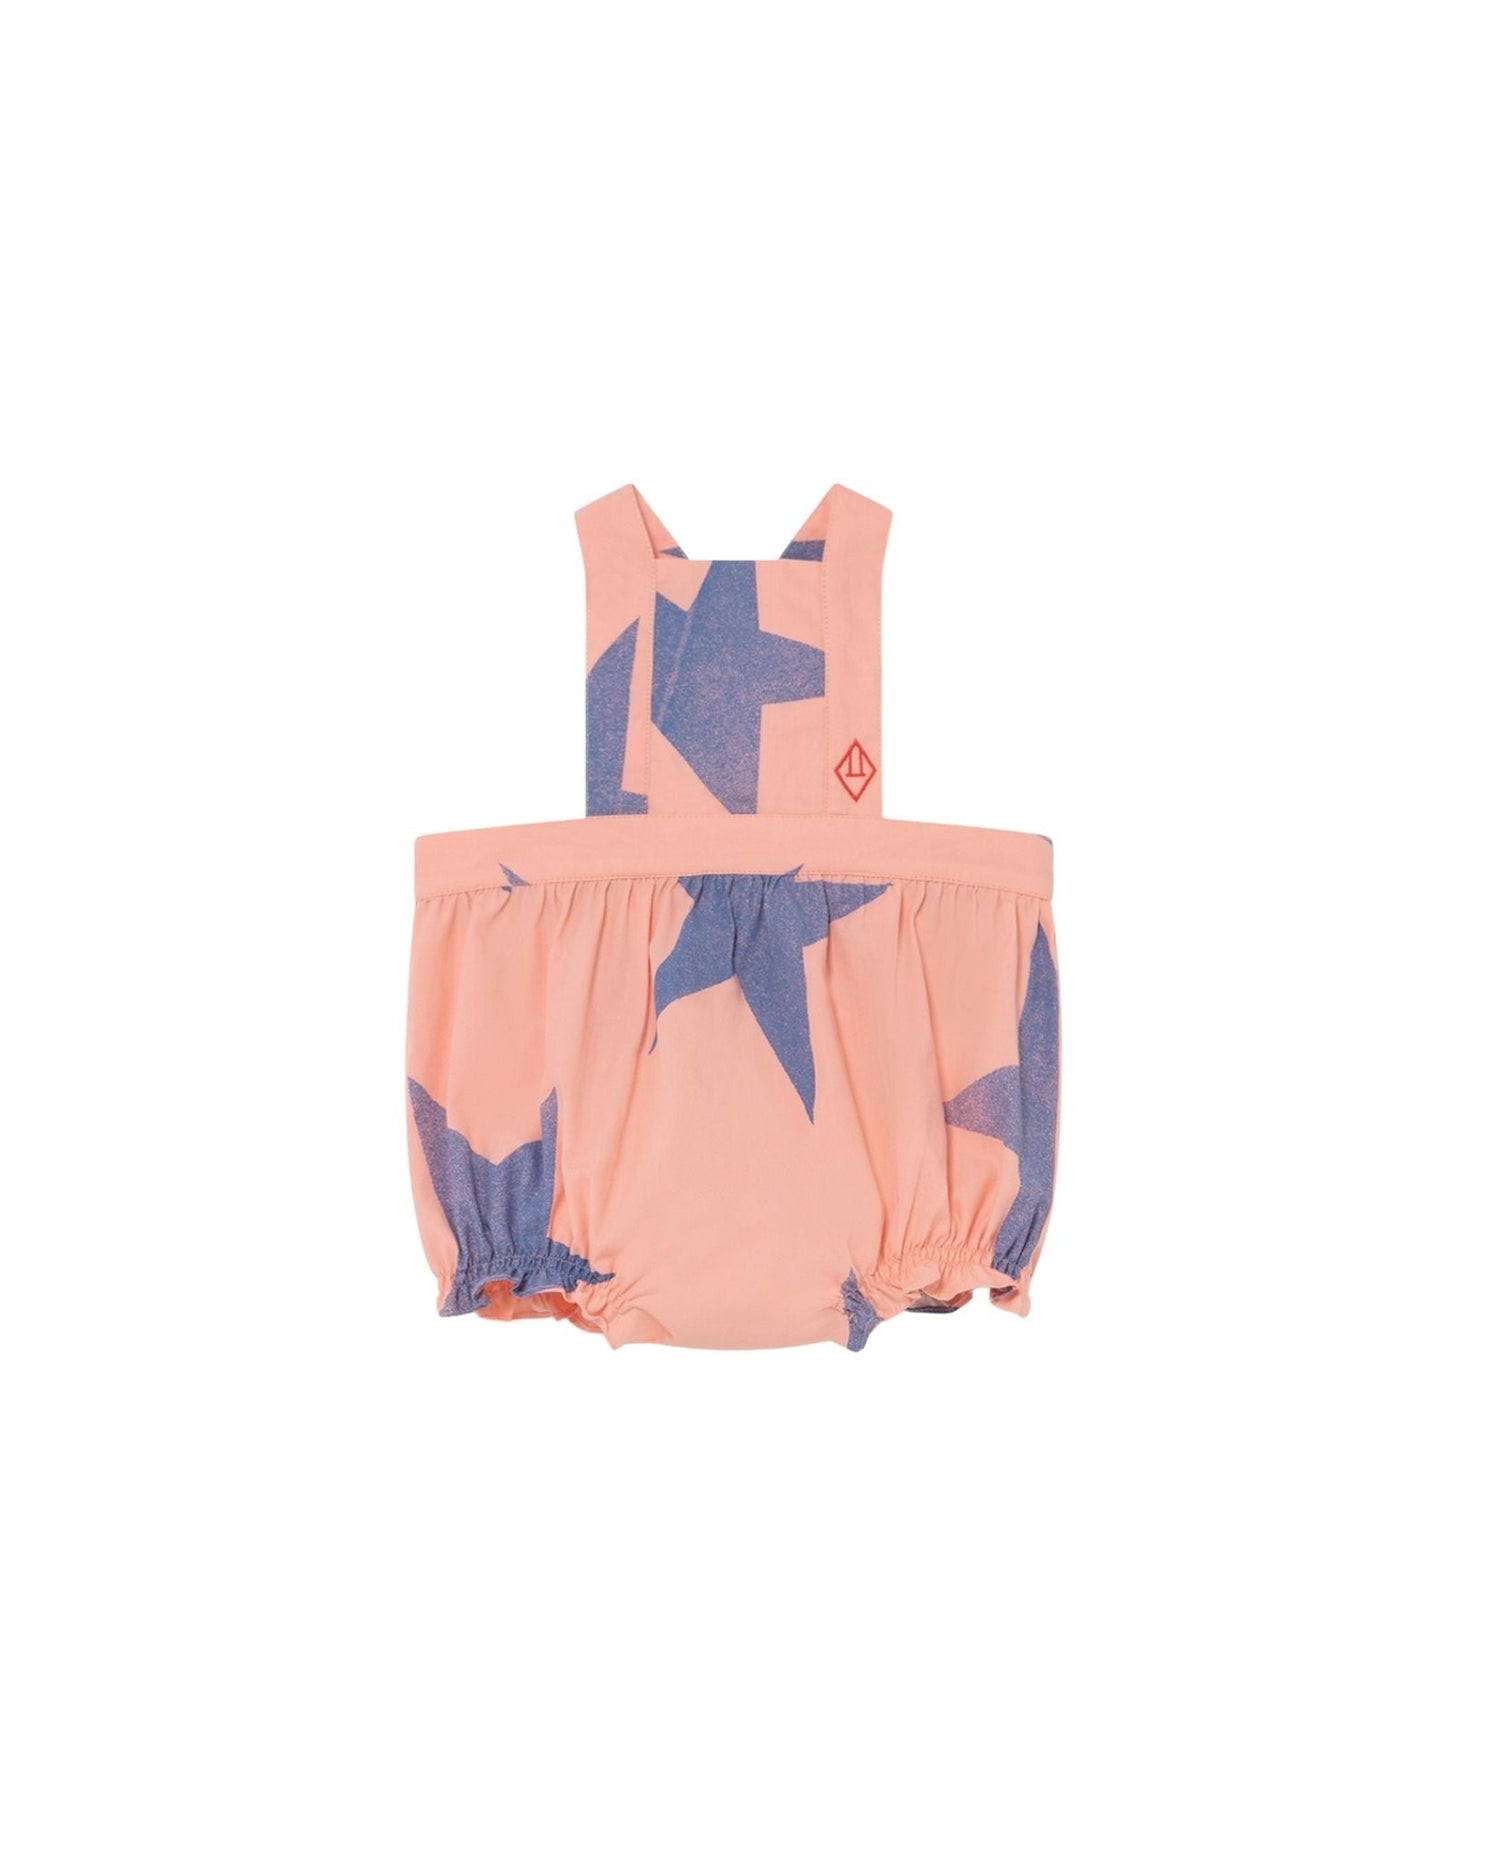 Meerkat baby jumpsuit Pink Stars Baby Grows The Animals Observatory 